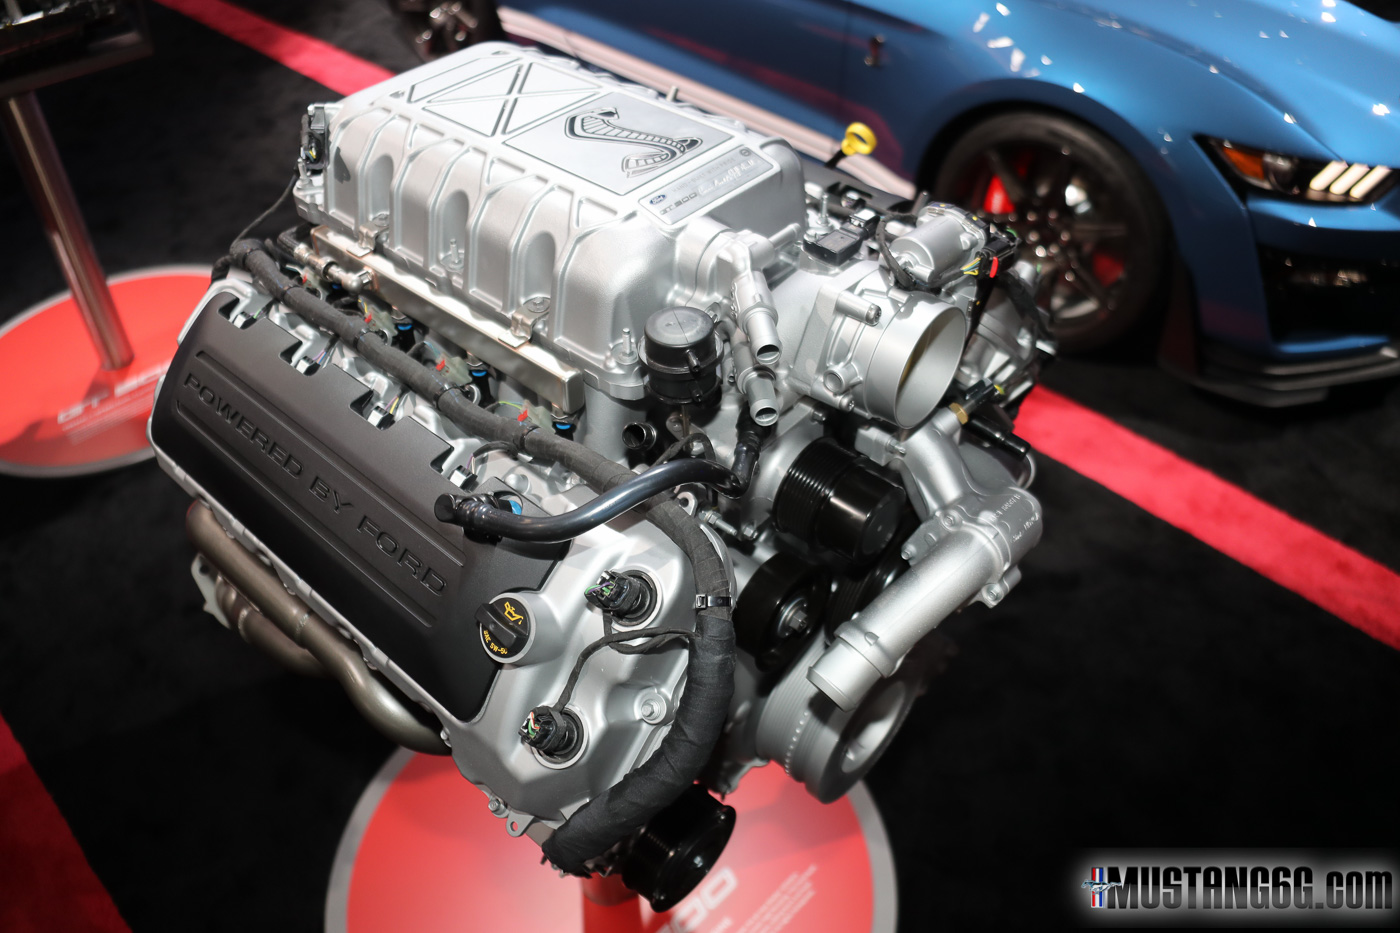 2020-Shelby-GT500-Mustang-Engine-and-Transmission-5.jpg